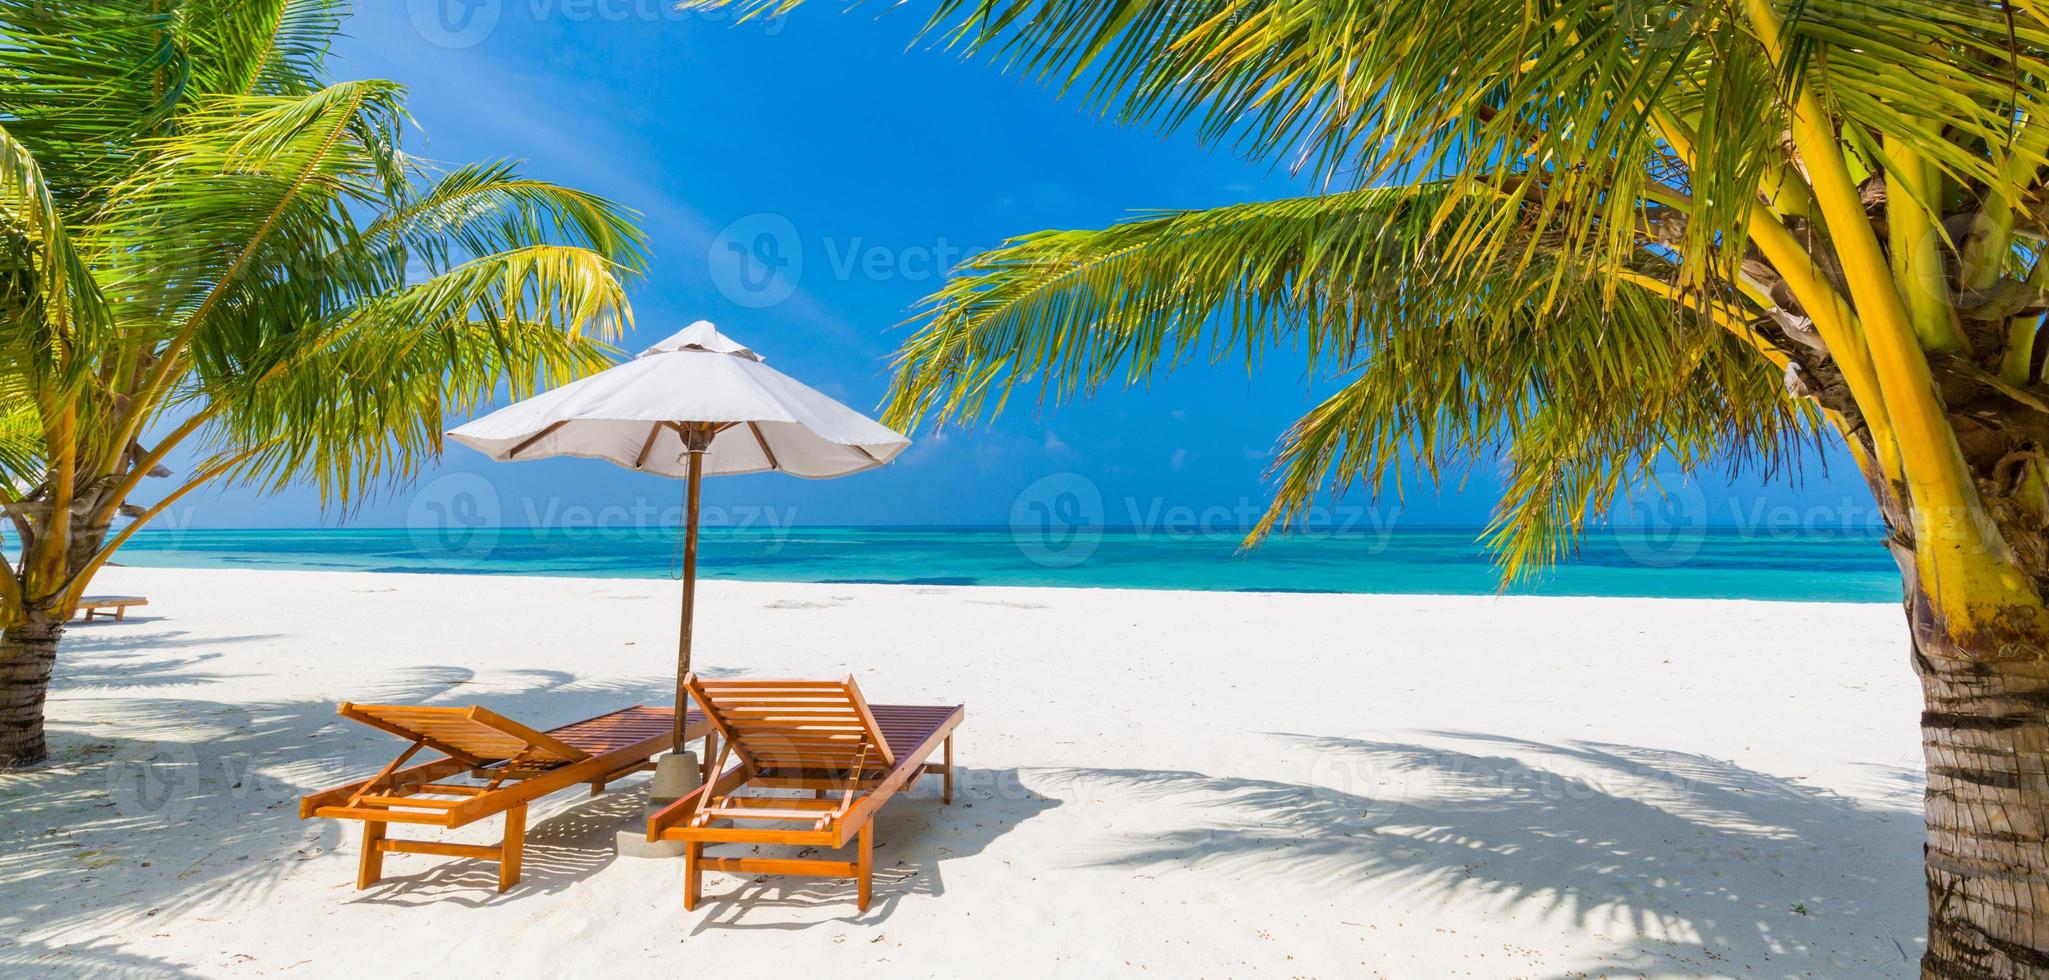 Beautiful tropical island scenery, two sun beds, loungers, umbrella under palm tree. White sand, sea view with horizon, idyllic blue sky, calmness and relaxation. Inspirational beach resort hotel photo